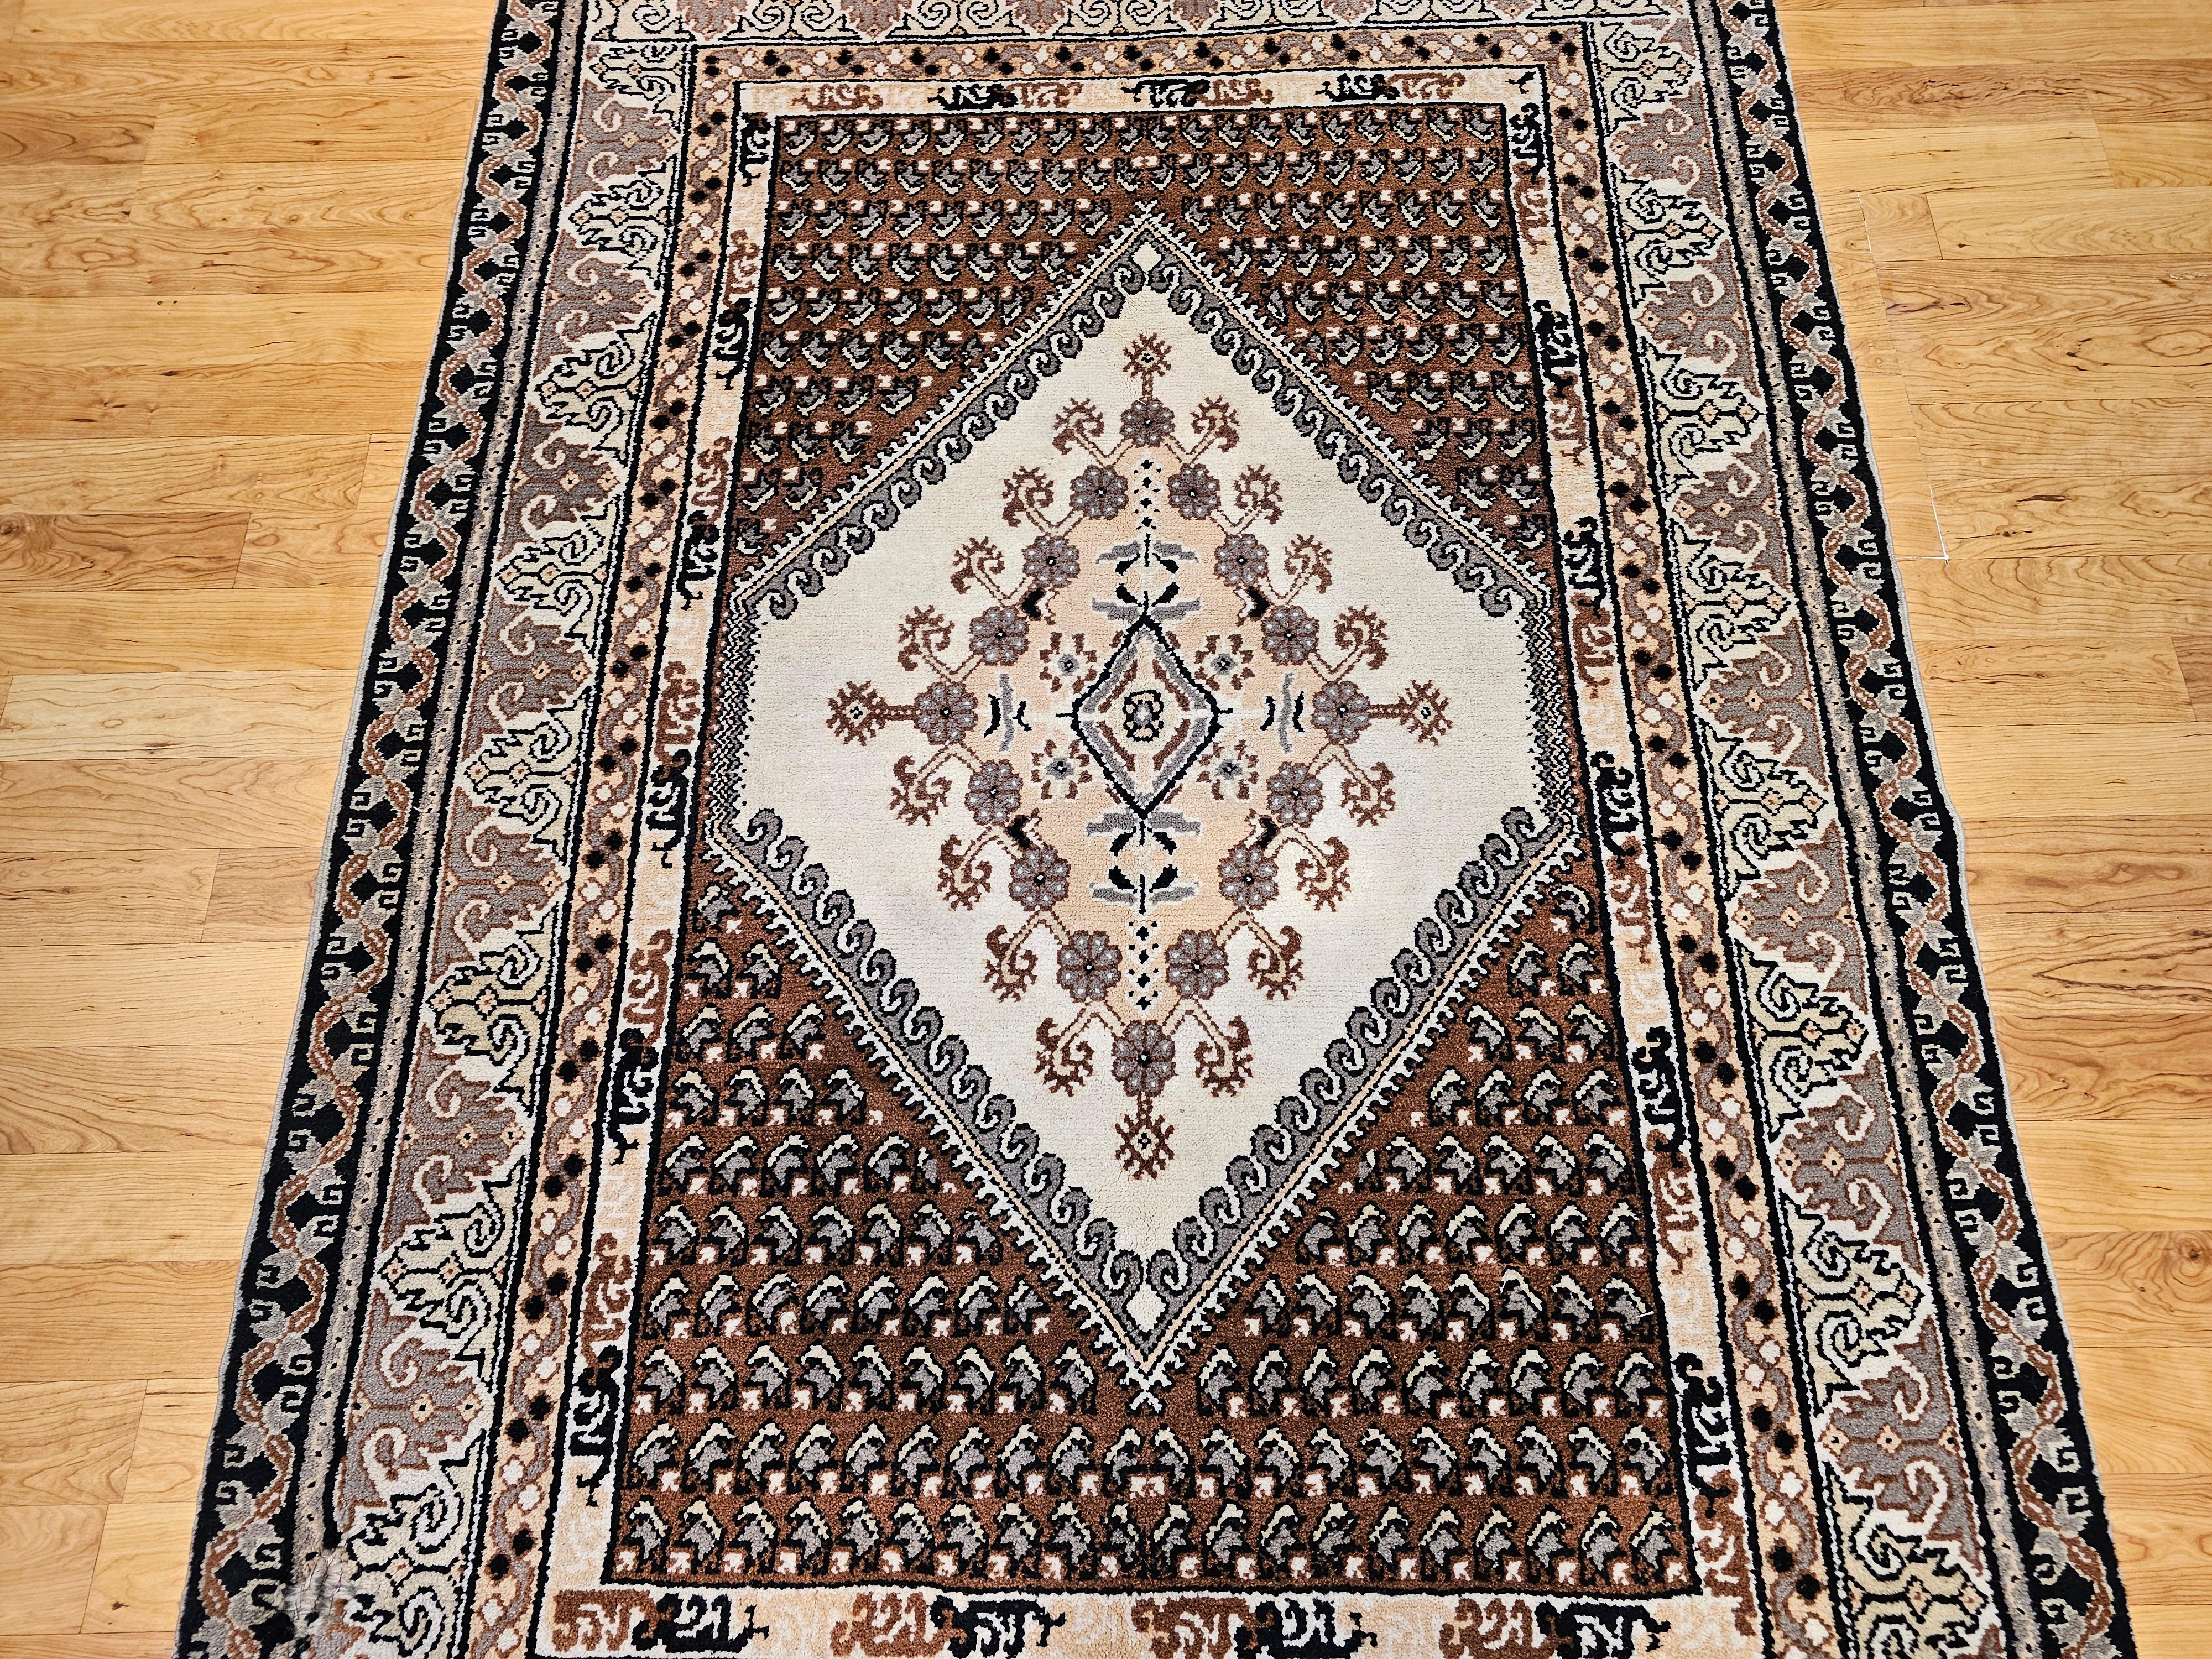 Vintage Moroccan Rug in Medallion Pattern in Brown, Ivory, Black, Gray In Good Condition For Sale In Barrington, IL